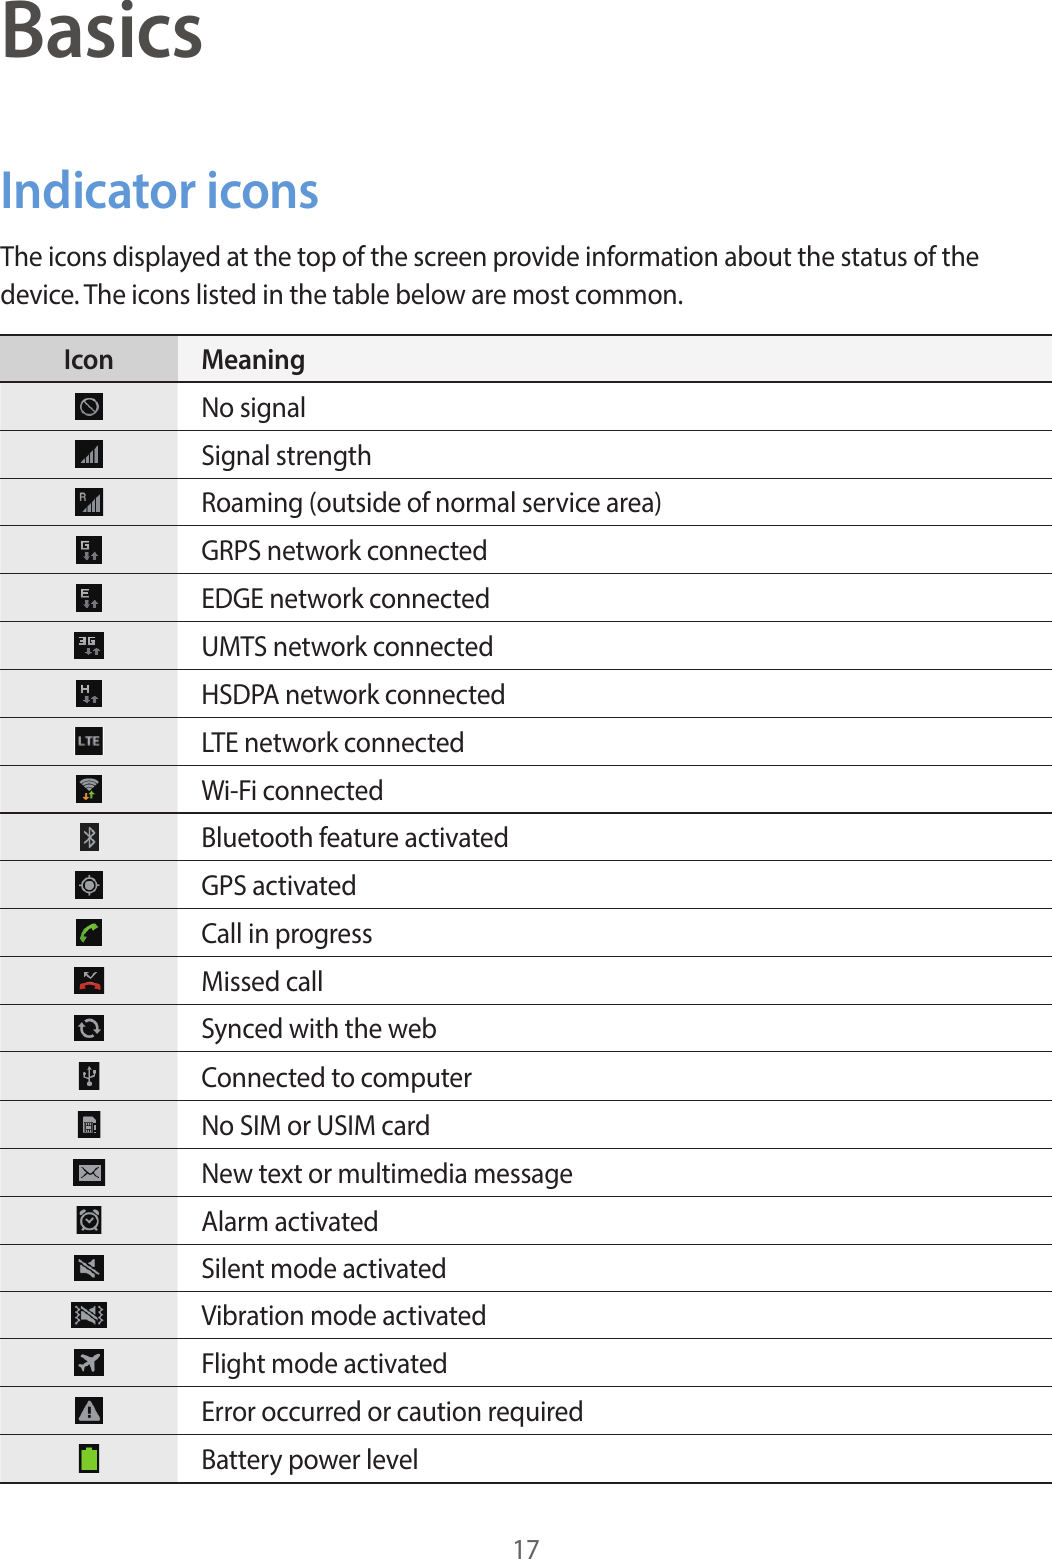 17BasicsIndicator iconsThe icons displayed at the top of the screen provide information about the status of the device. The icons listed in the table below are most common.Icon MeaningNo signalSignal strengthRoaming (outside of normal service area)GRPS network connectedEDGE network connectedUMTS network connectedHSDPA network connectedLTE network connectedWi-Fi connectedBluetooth feature activatedGPS activatedCall in progressMissed callSynced with the webConnected to computerNo SIM or USIM cardNew text or multimedia messageAlarm activatedSilent mode activatedVibration mode activatedFlight mode activatedError occurred or caution requiredBattery power level